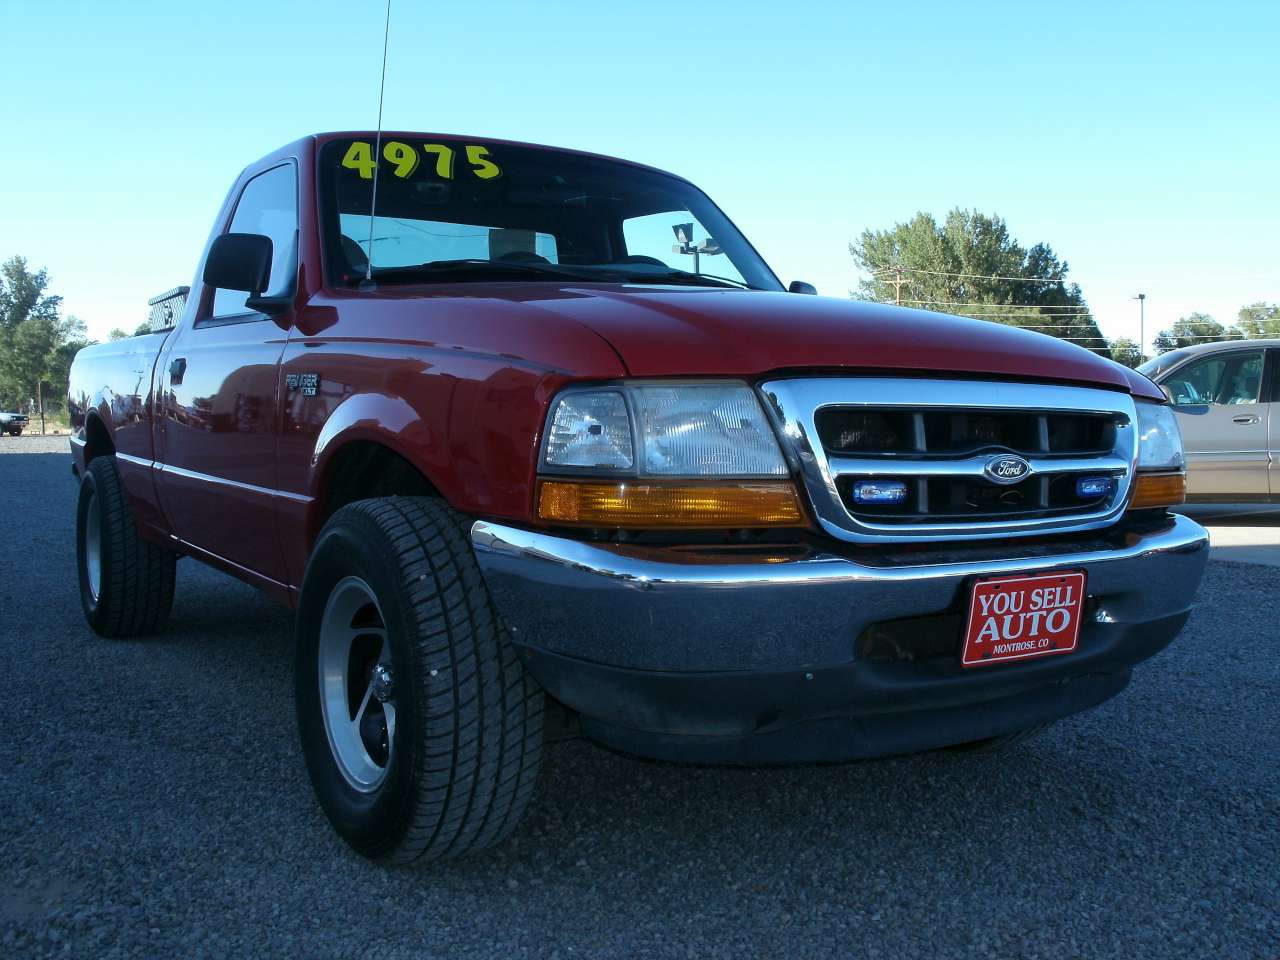 2000 FORD RANGER XLT @ $4,975 | You Sell Auto